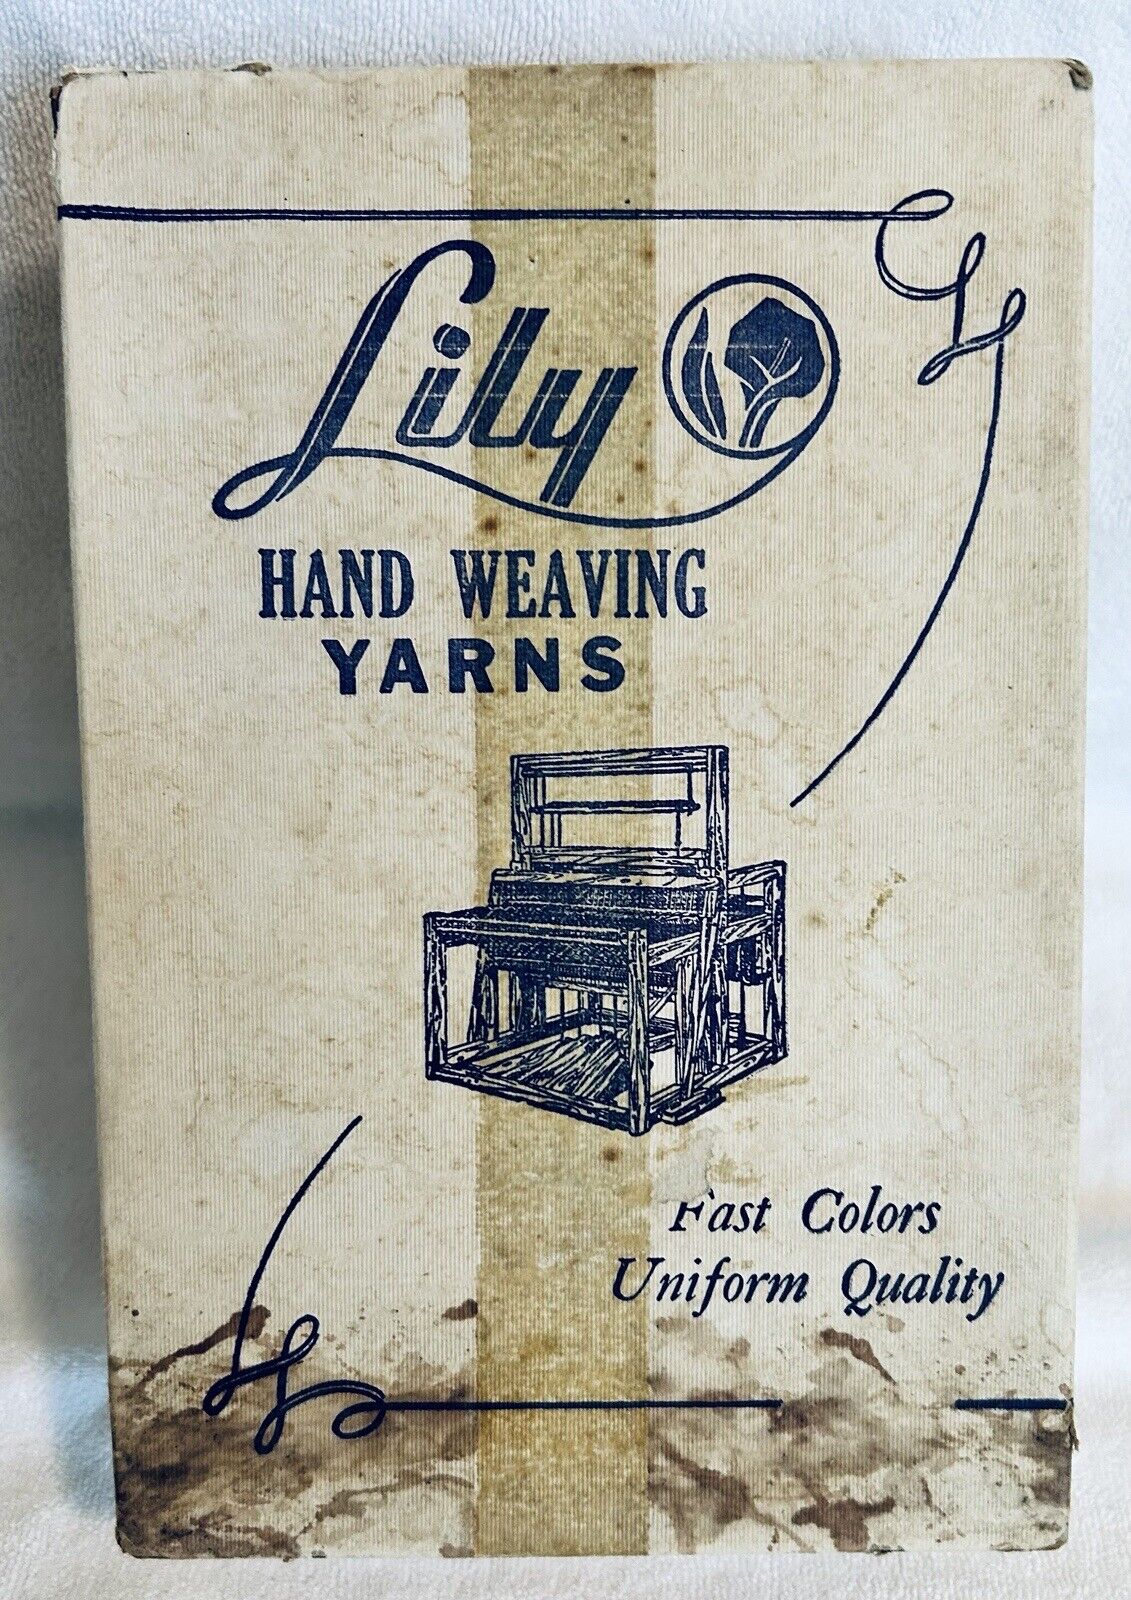 Vintage Box of 8 Lily Hand Weaving 2oz Linen Yarn Tubes - Vanilla Color/Used